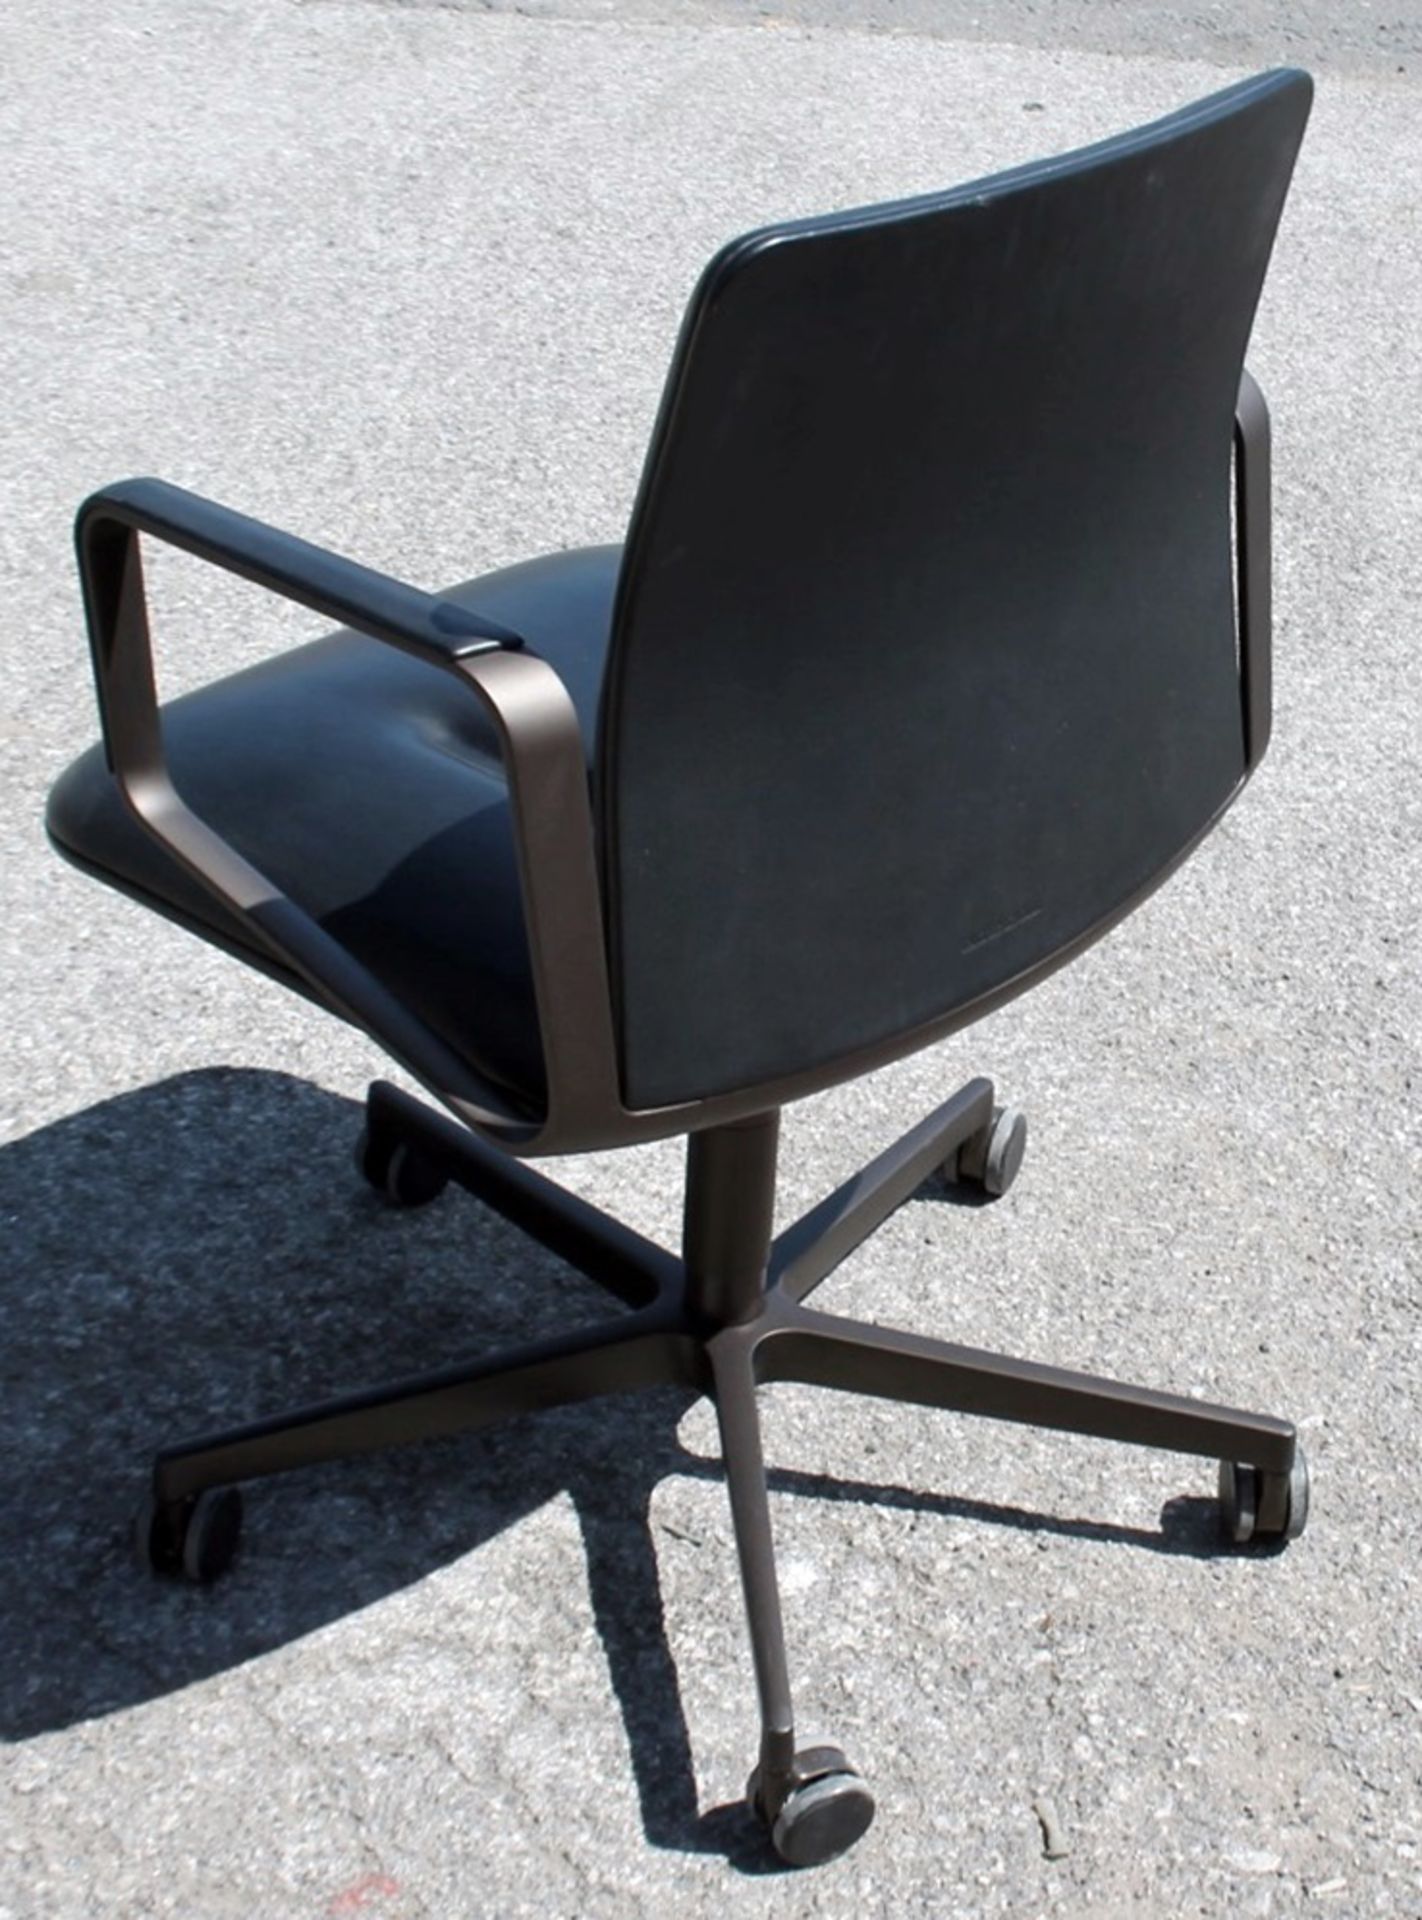 1 x WALTER KNOLL 'Leadchair' Executive Meeting Chair In Genuine Leather - Original RRP £4,250 - Image 8 of 9